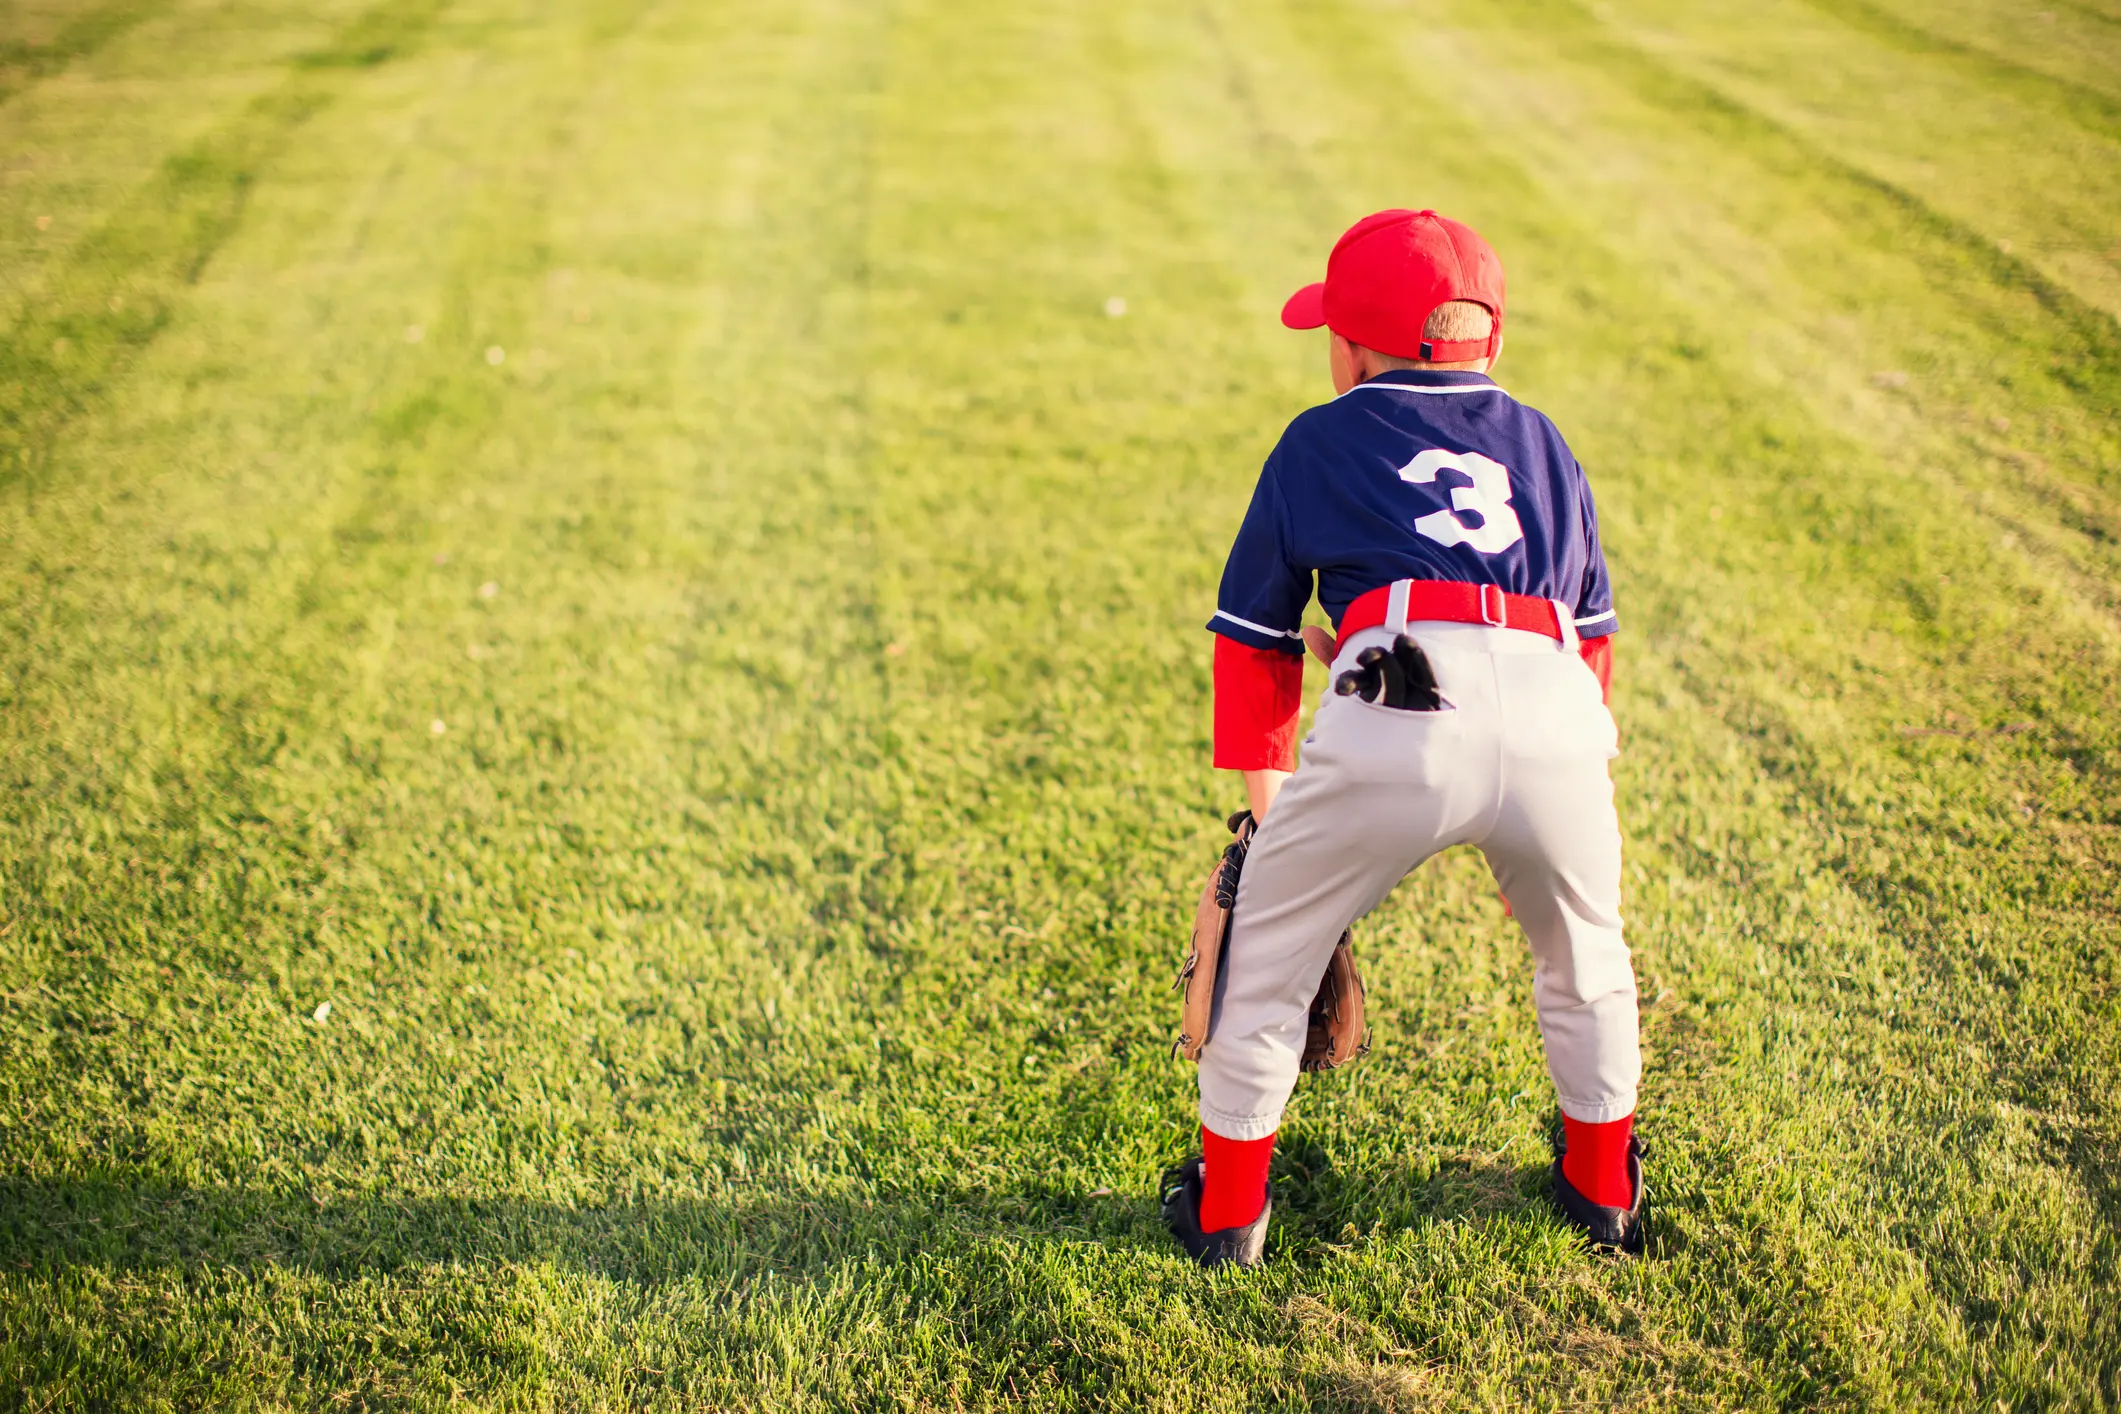 Featured image: How to Get Sponsorship for Your Youth Baseball Team